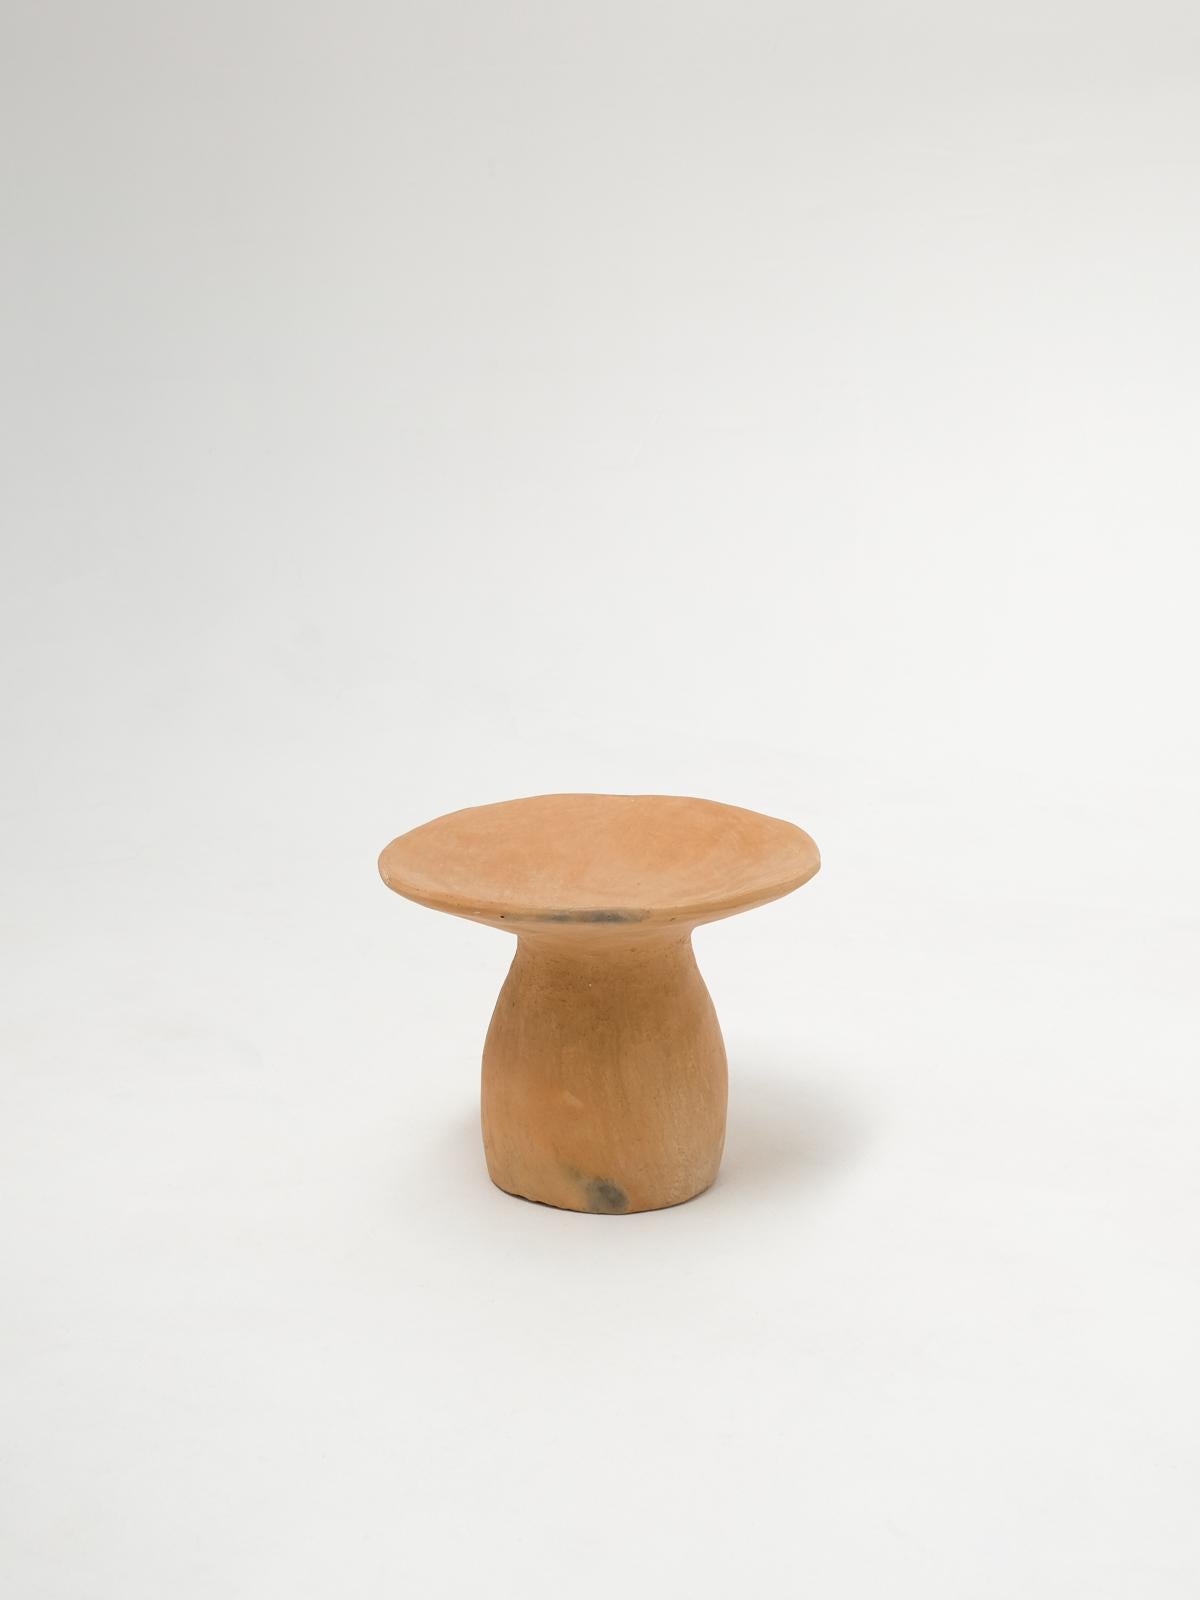 - Handbuilt terracotta small side table, stool for bedroom or living room
- made of clay collected from the potter's surroundings.
- made in the Moroccan Rif mountains by the potter Houda.
- co-created by the potter Houda x memòri team

Approximate